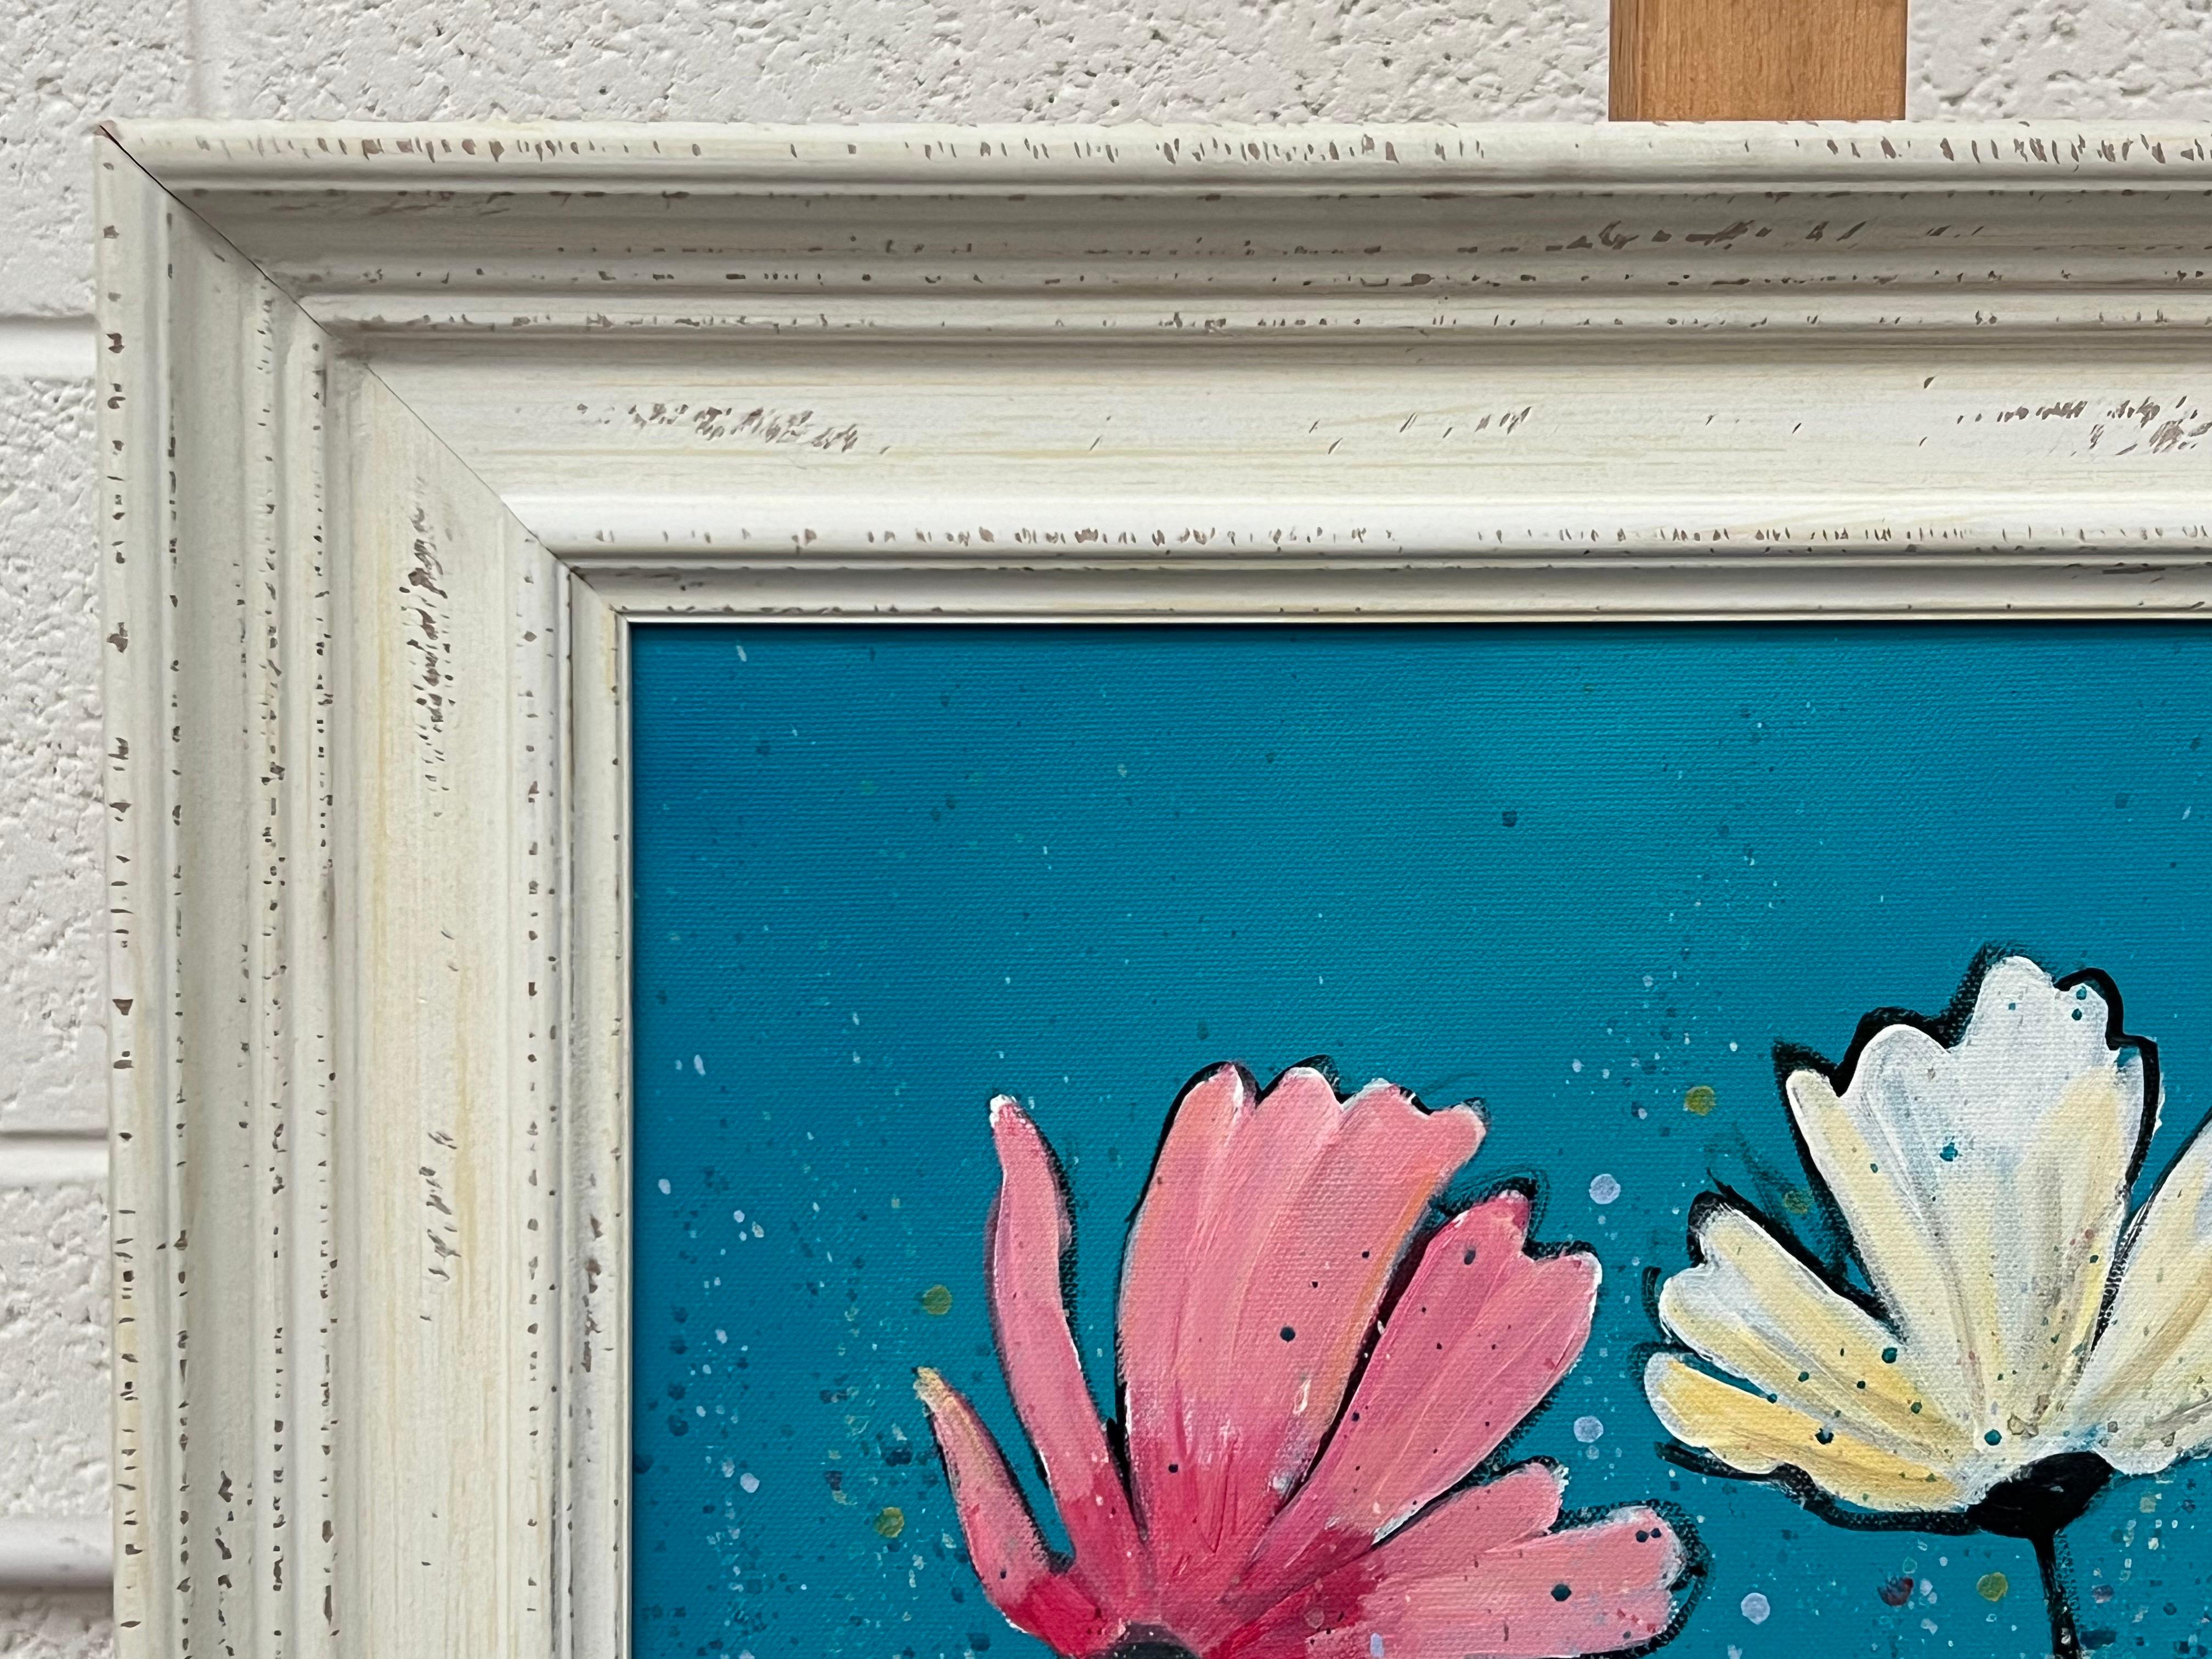 Design Study of Wild Pink & White Flowers on Turquoise by Contemporary Artist For Sale 3